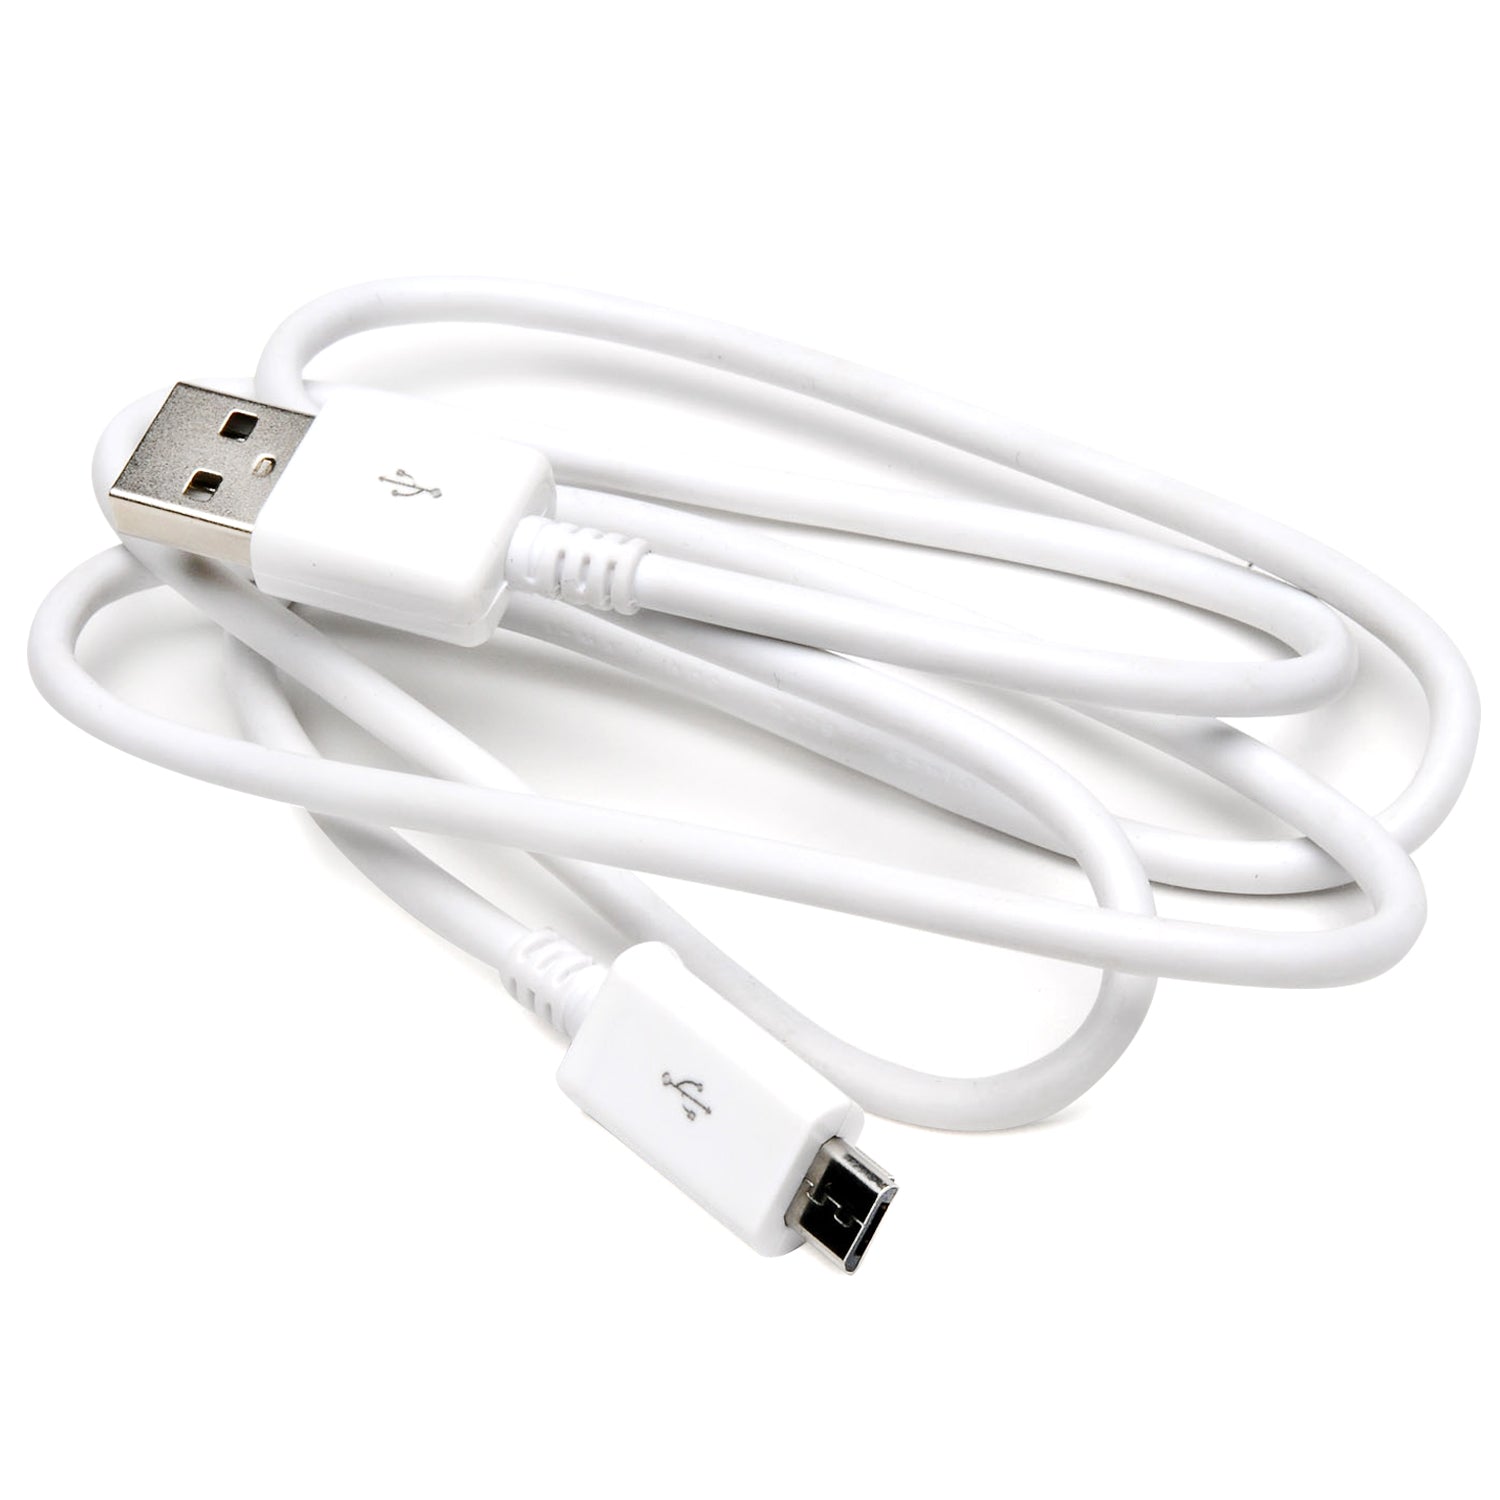 6-MA2110 USB CABLE 3FT TO MICRO 5P